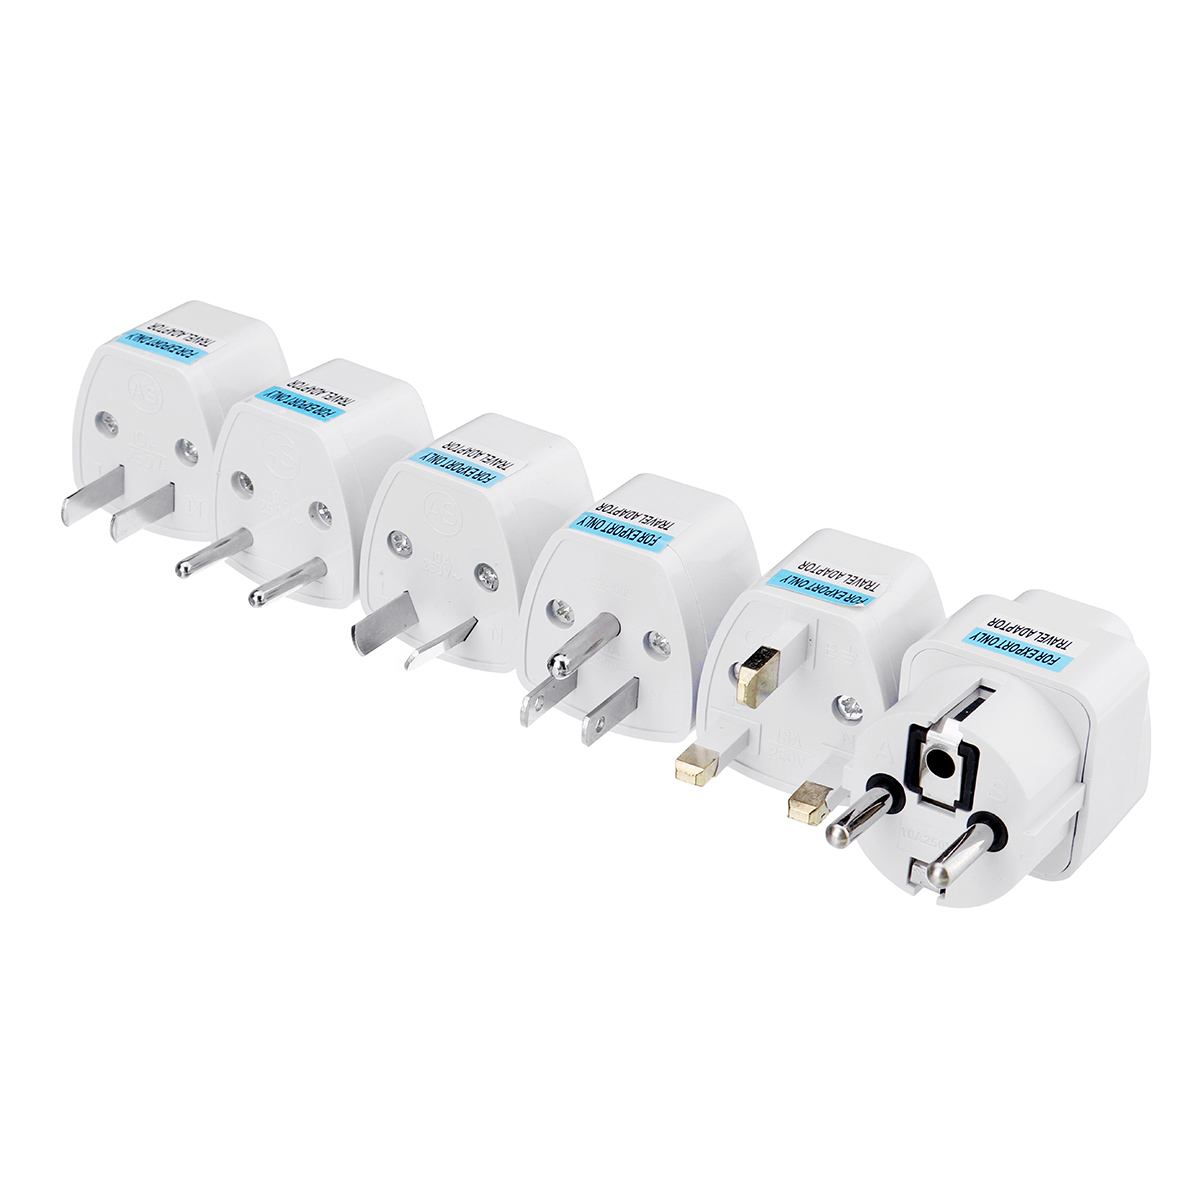 Global Universal Adapter Plug Adapter Charger Travel Wall AC Power Charger Outlet Adapter Converter